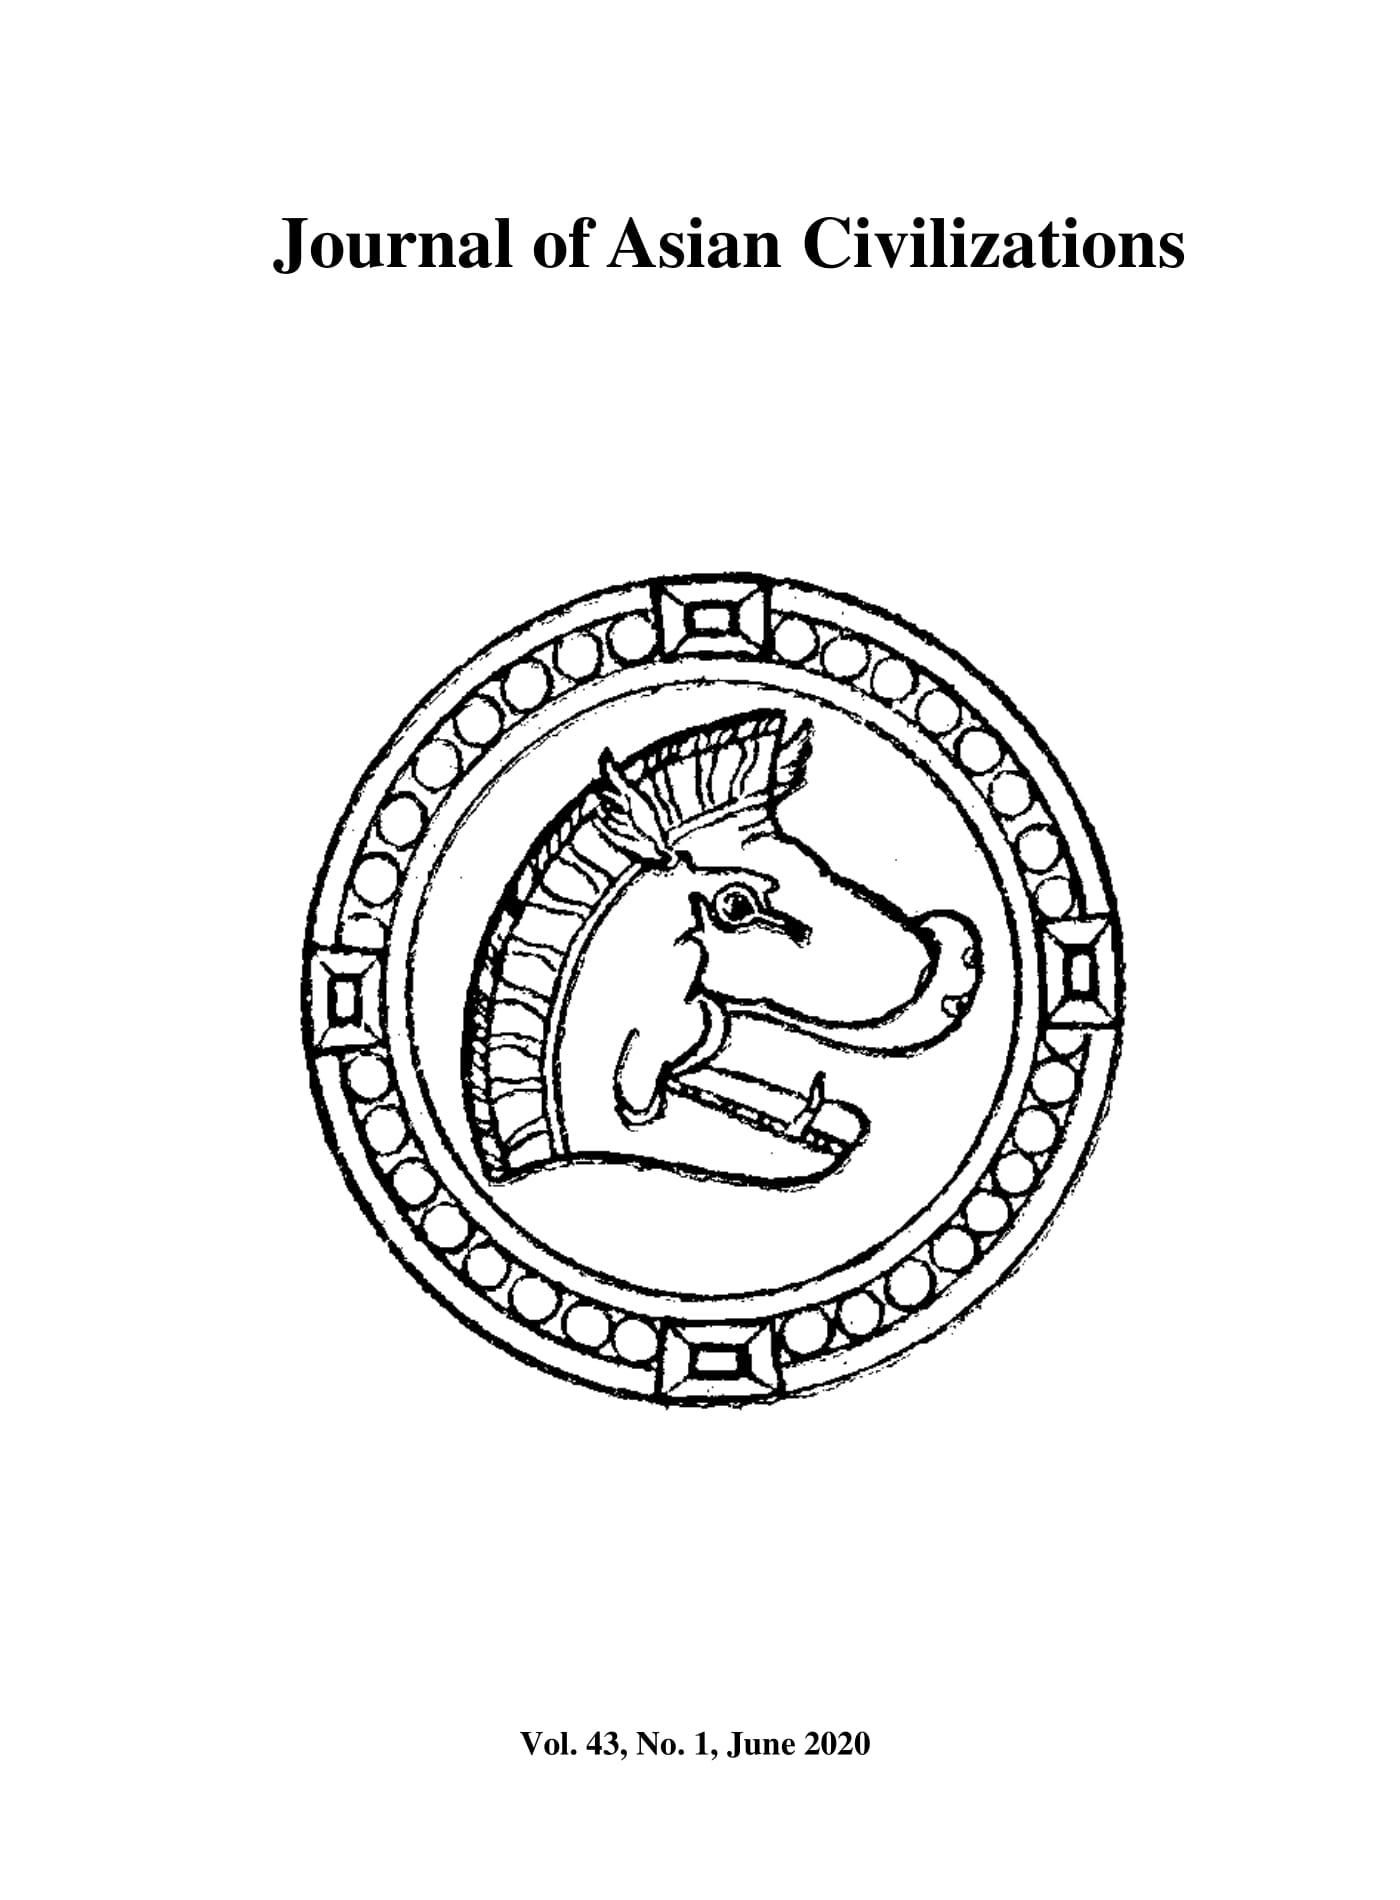 Wild boar heads within pearl roundel, Bamyan (after Tarzi 1977: logo on the cover).